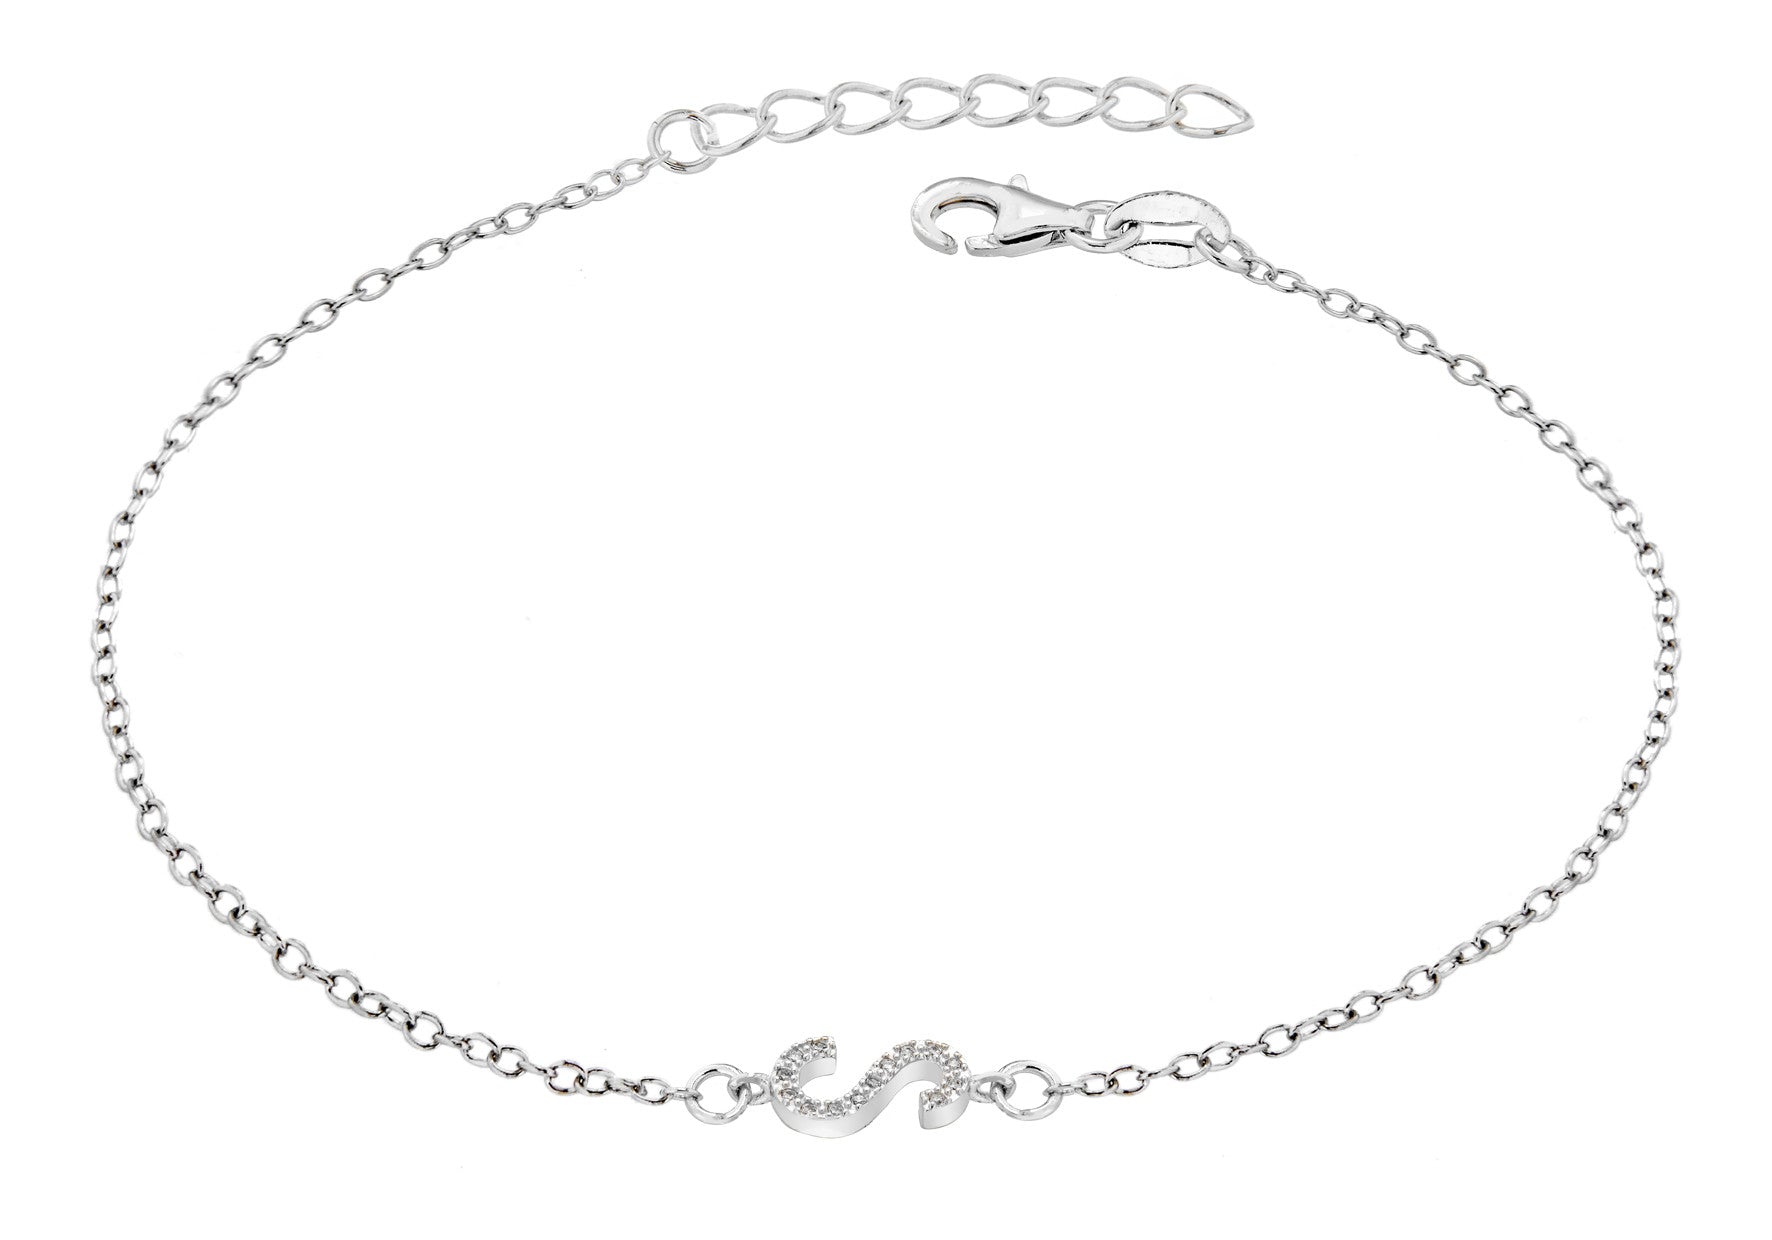 Estele Rhodium Plated M Letter Bracelet with Crystals for Men and